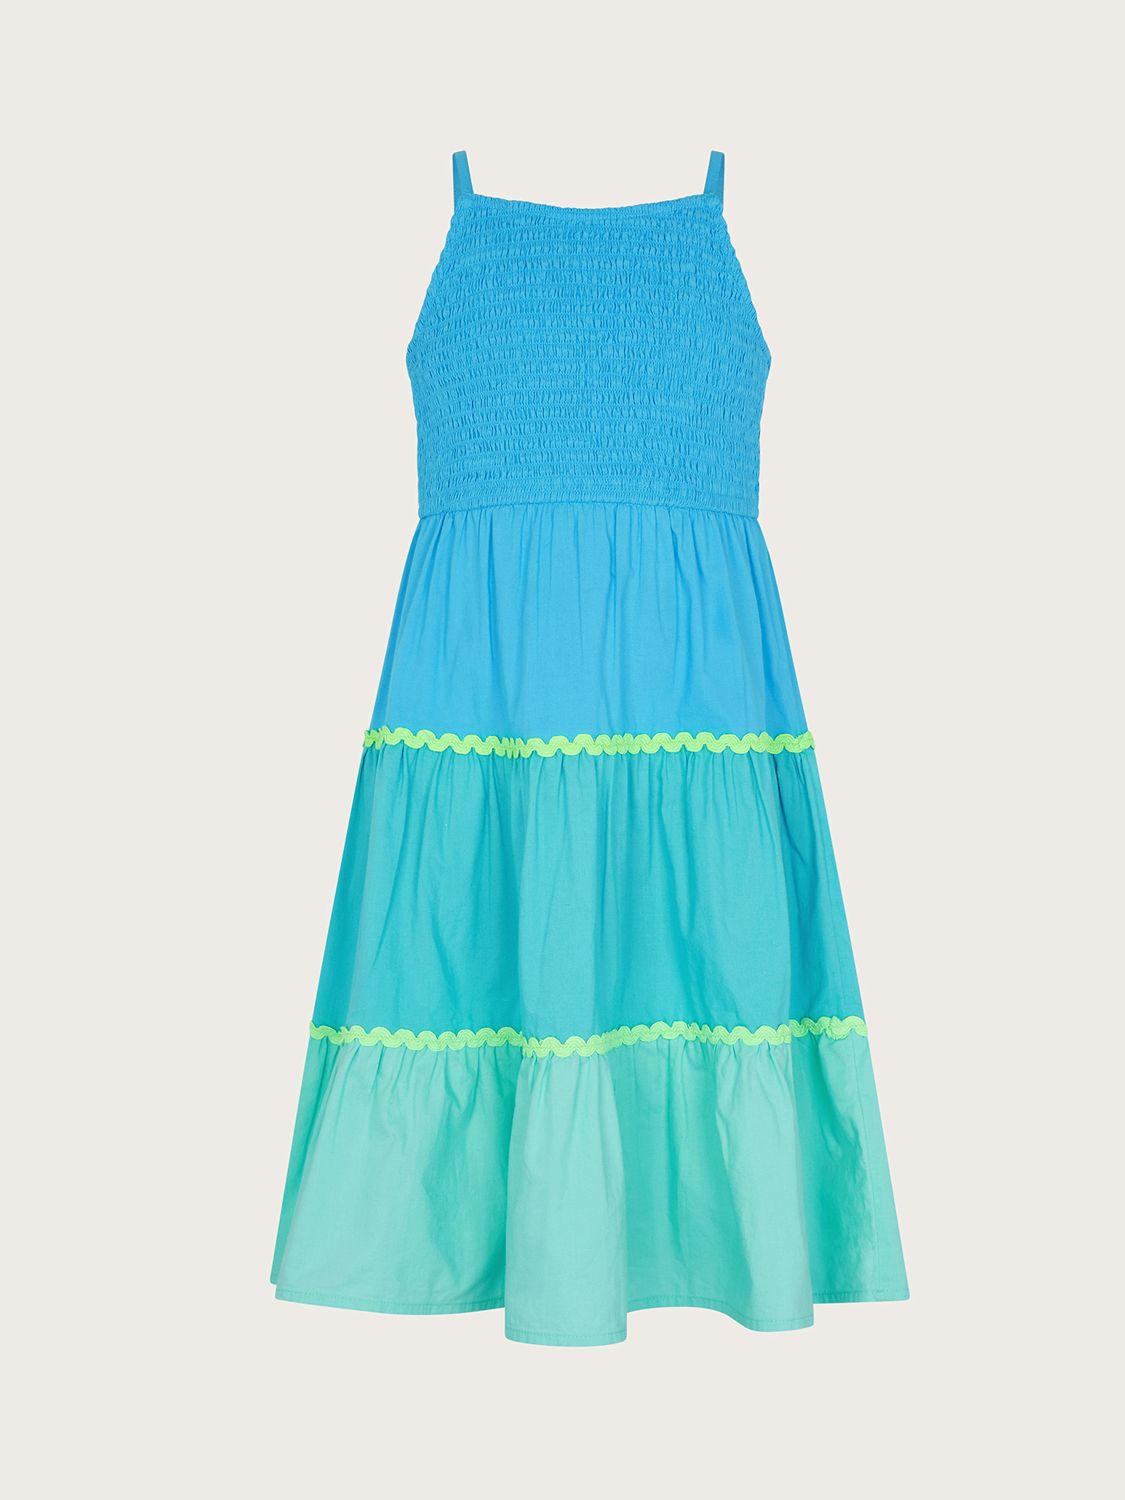 Monsoon Kids' Ruched Colour Block Tiered Dress, Blue, 3-4 years